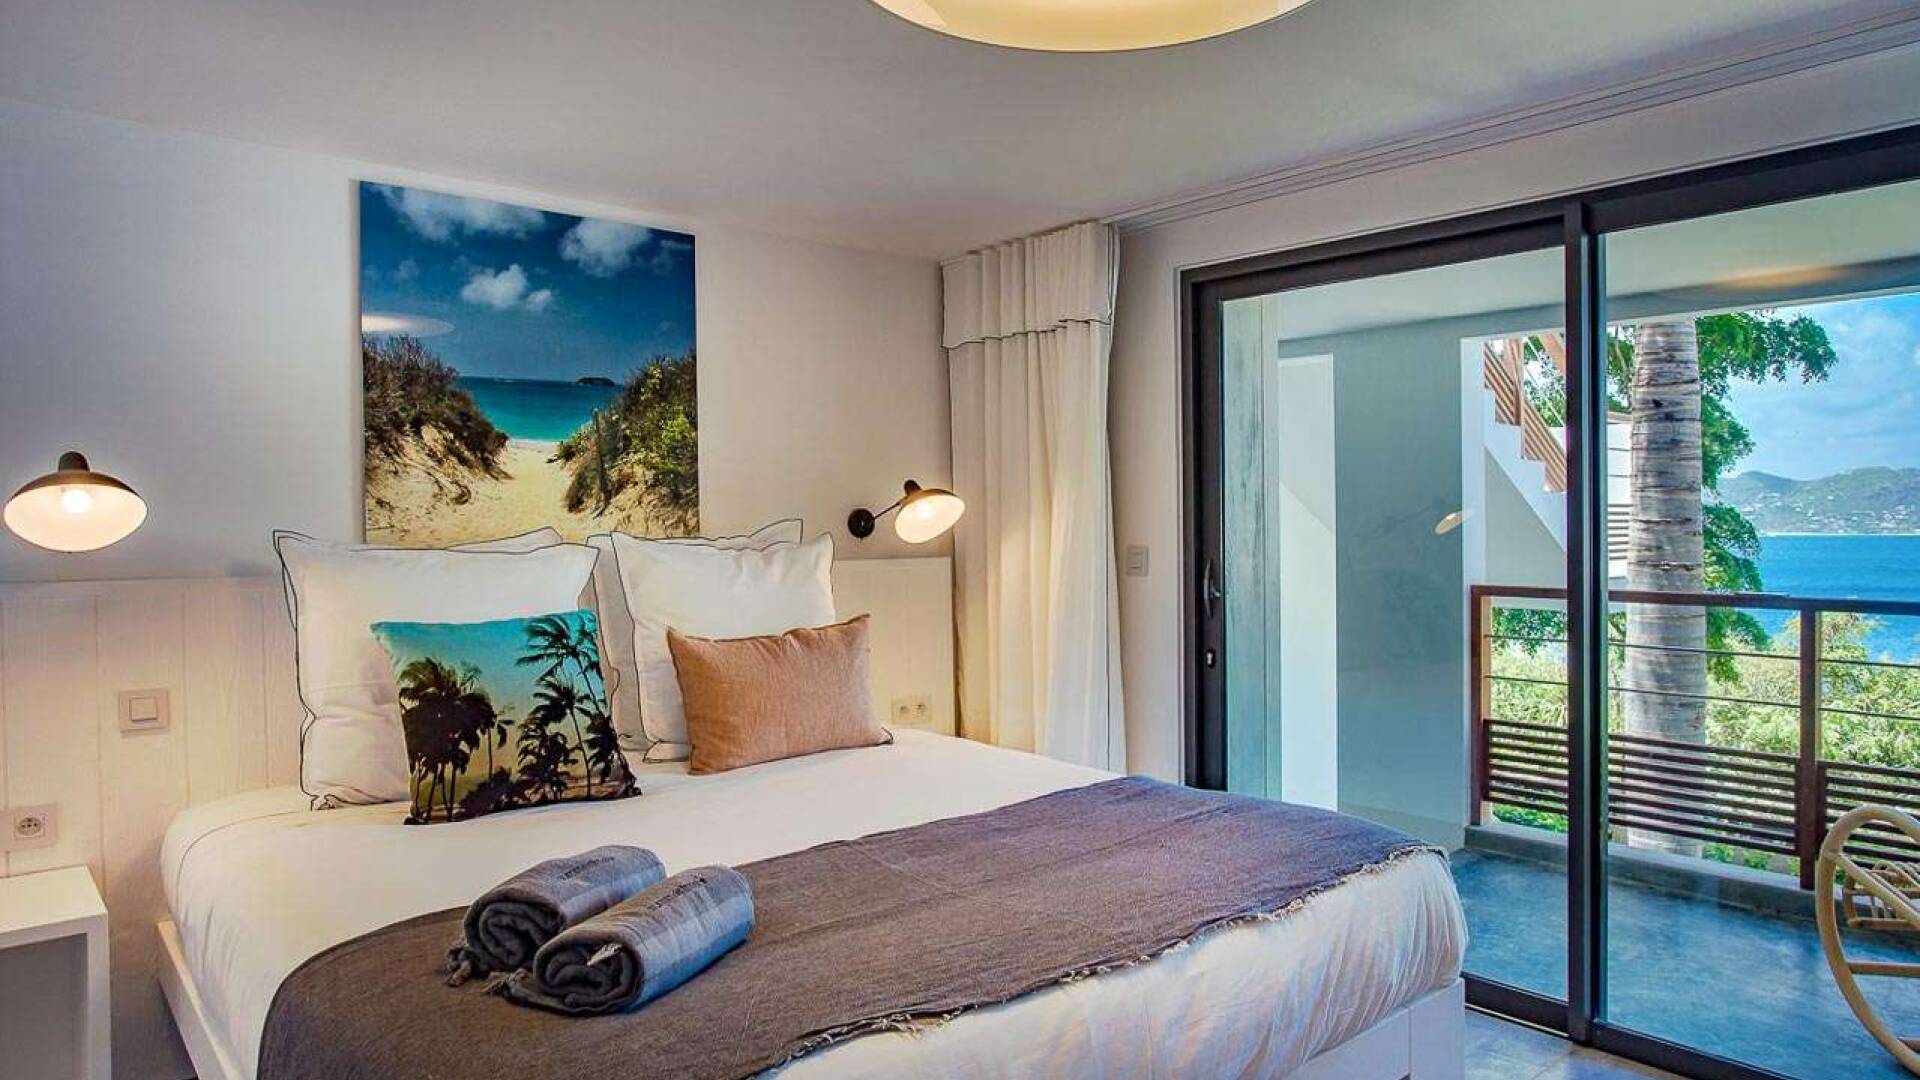 Bedroom at WV SUM, Pointe Milou, St. Barthelemy